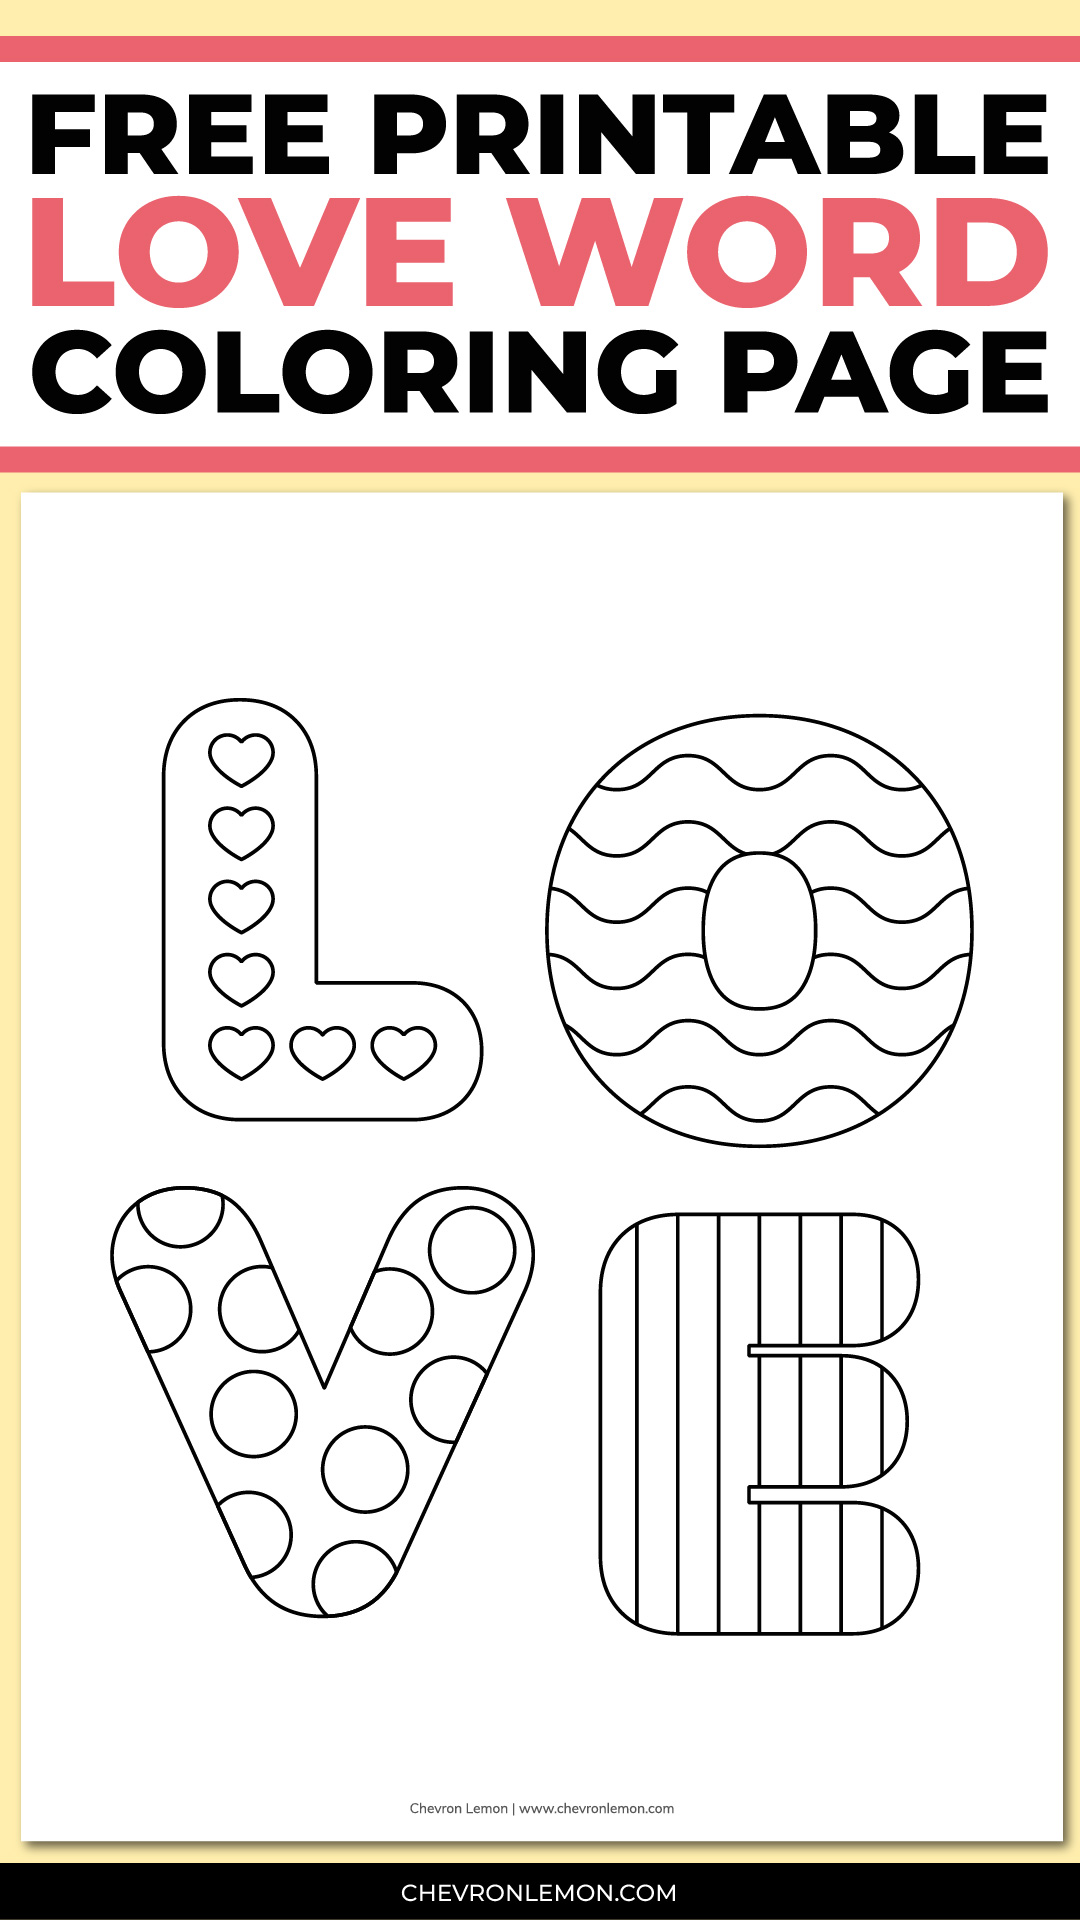 Printable love word coloring page